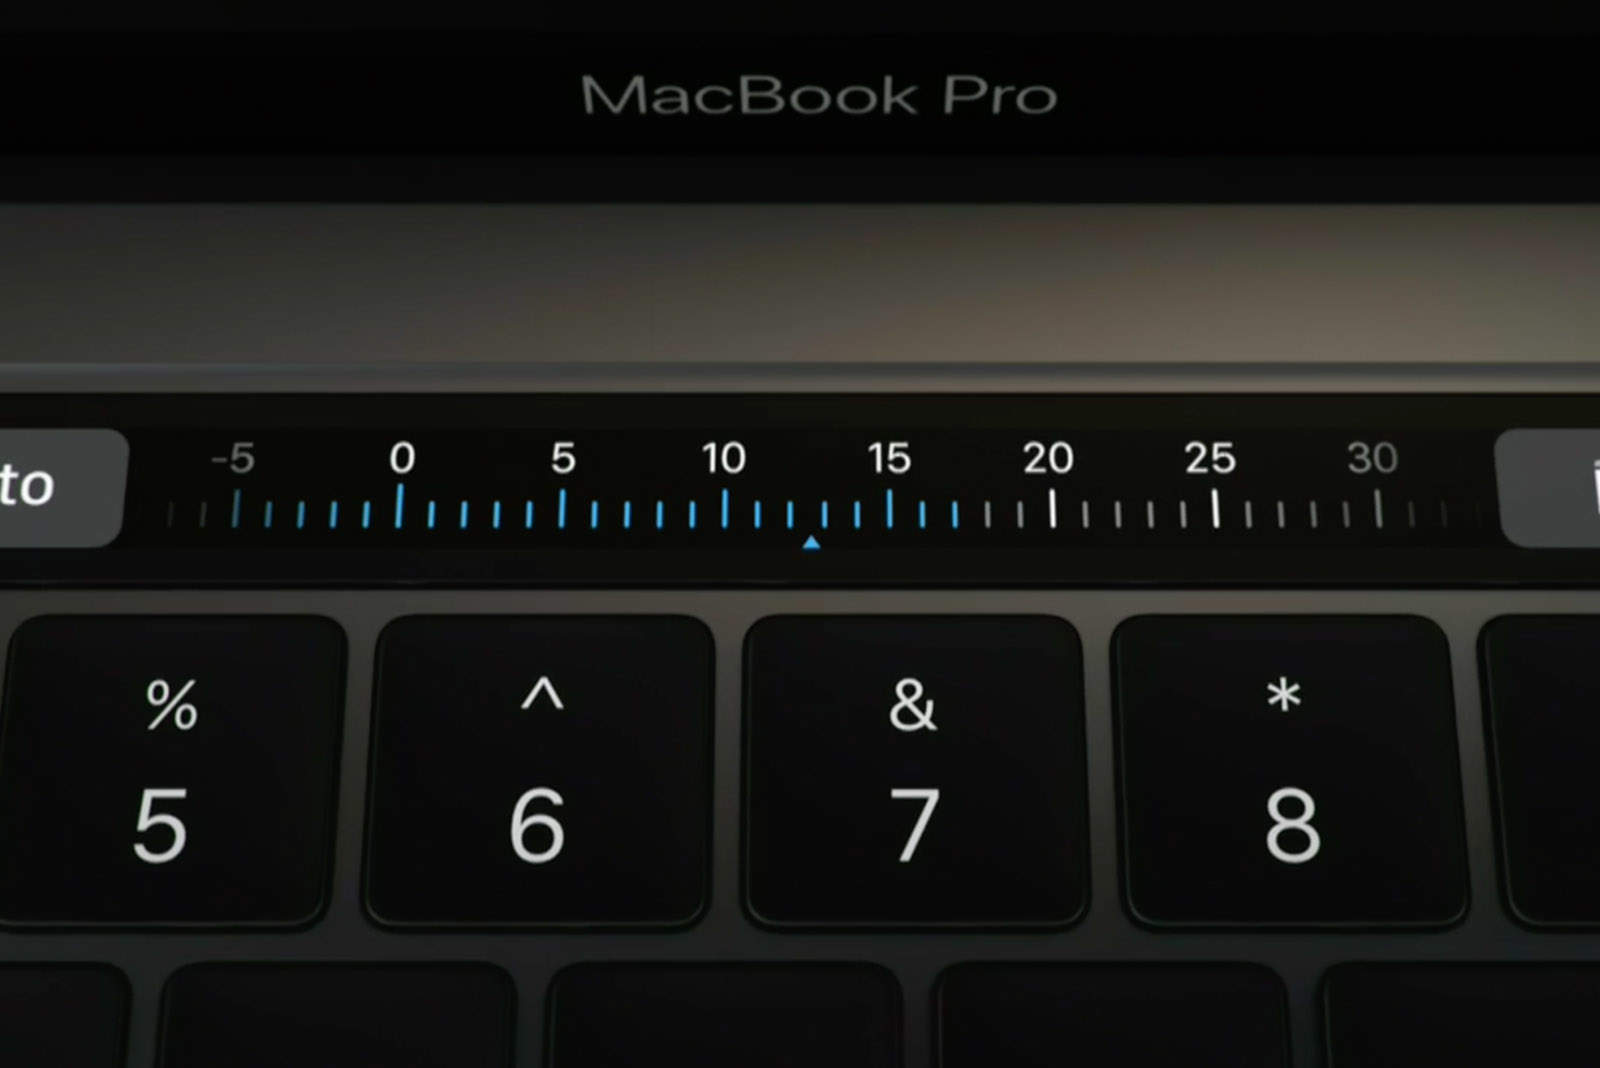 The new MacBook Pro has a bit of iOS inside.